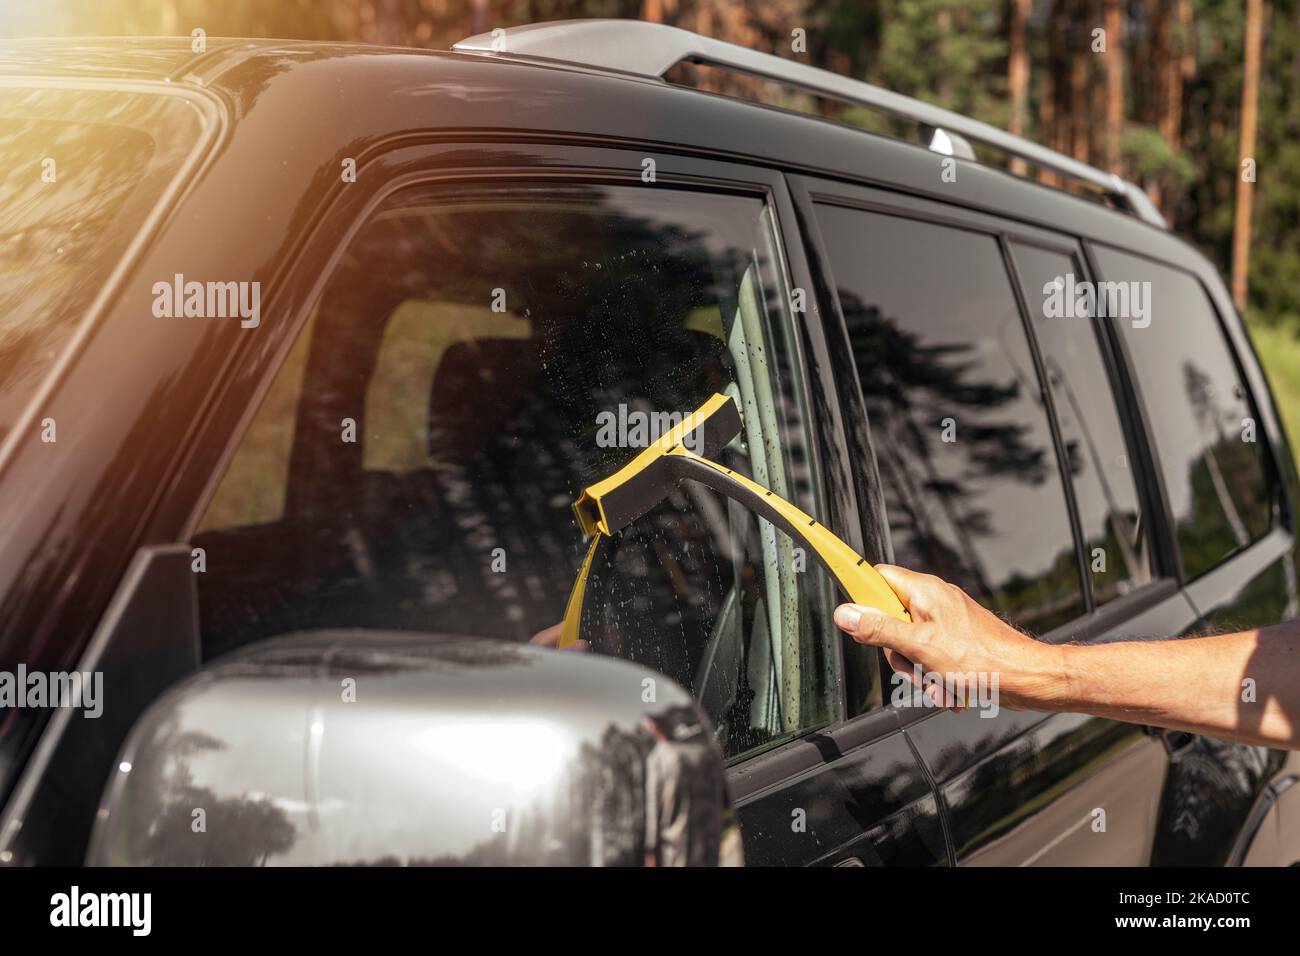 Driver hand with car cleaner cleaning and washing auto window in summer. Stock Photo